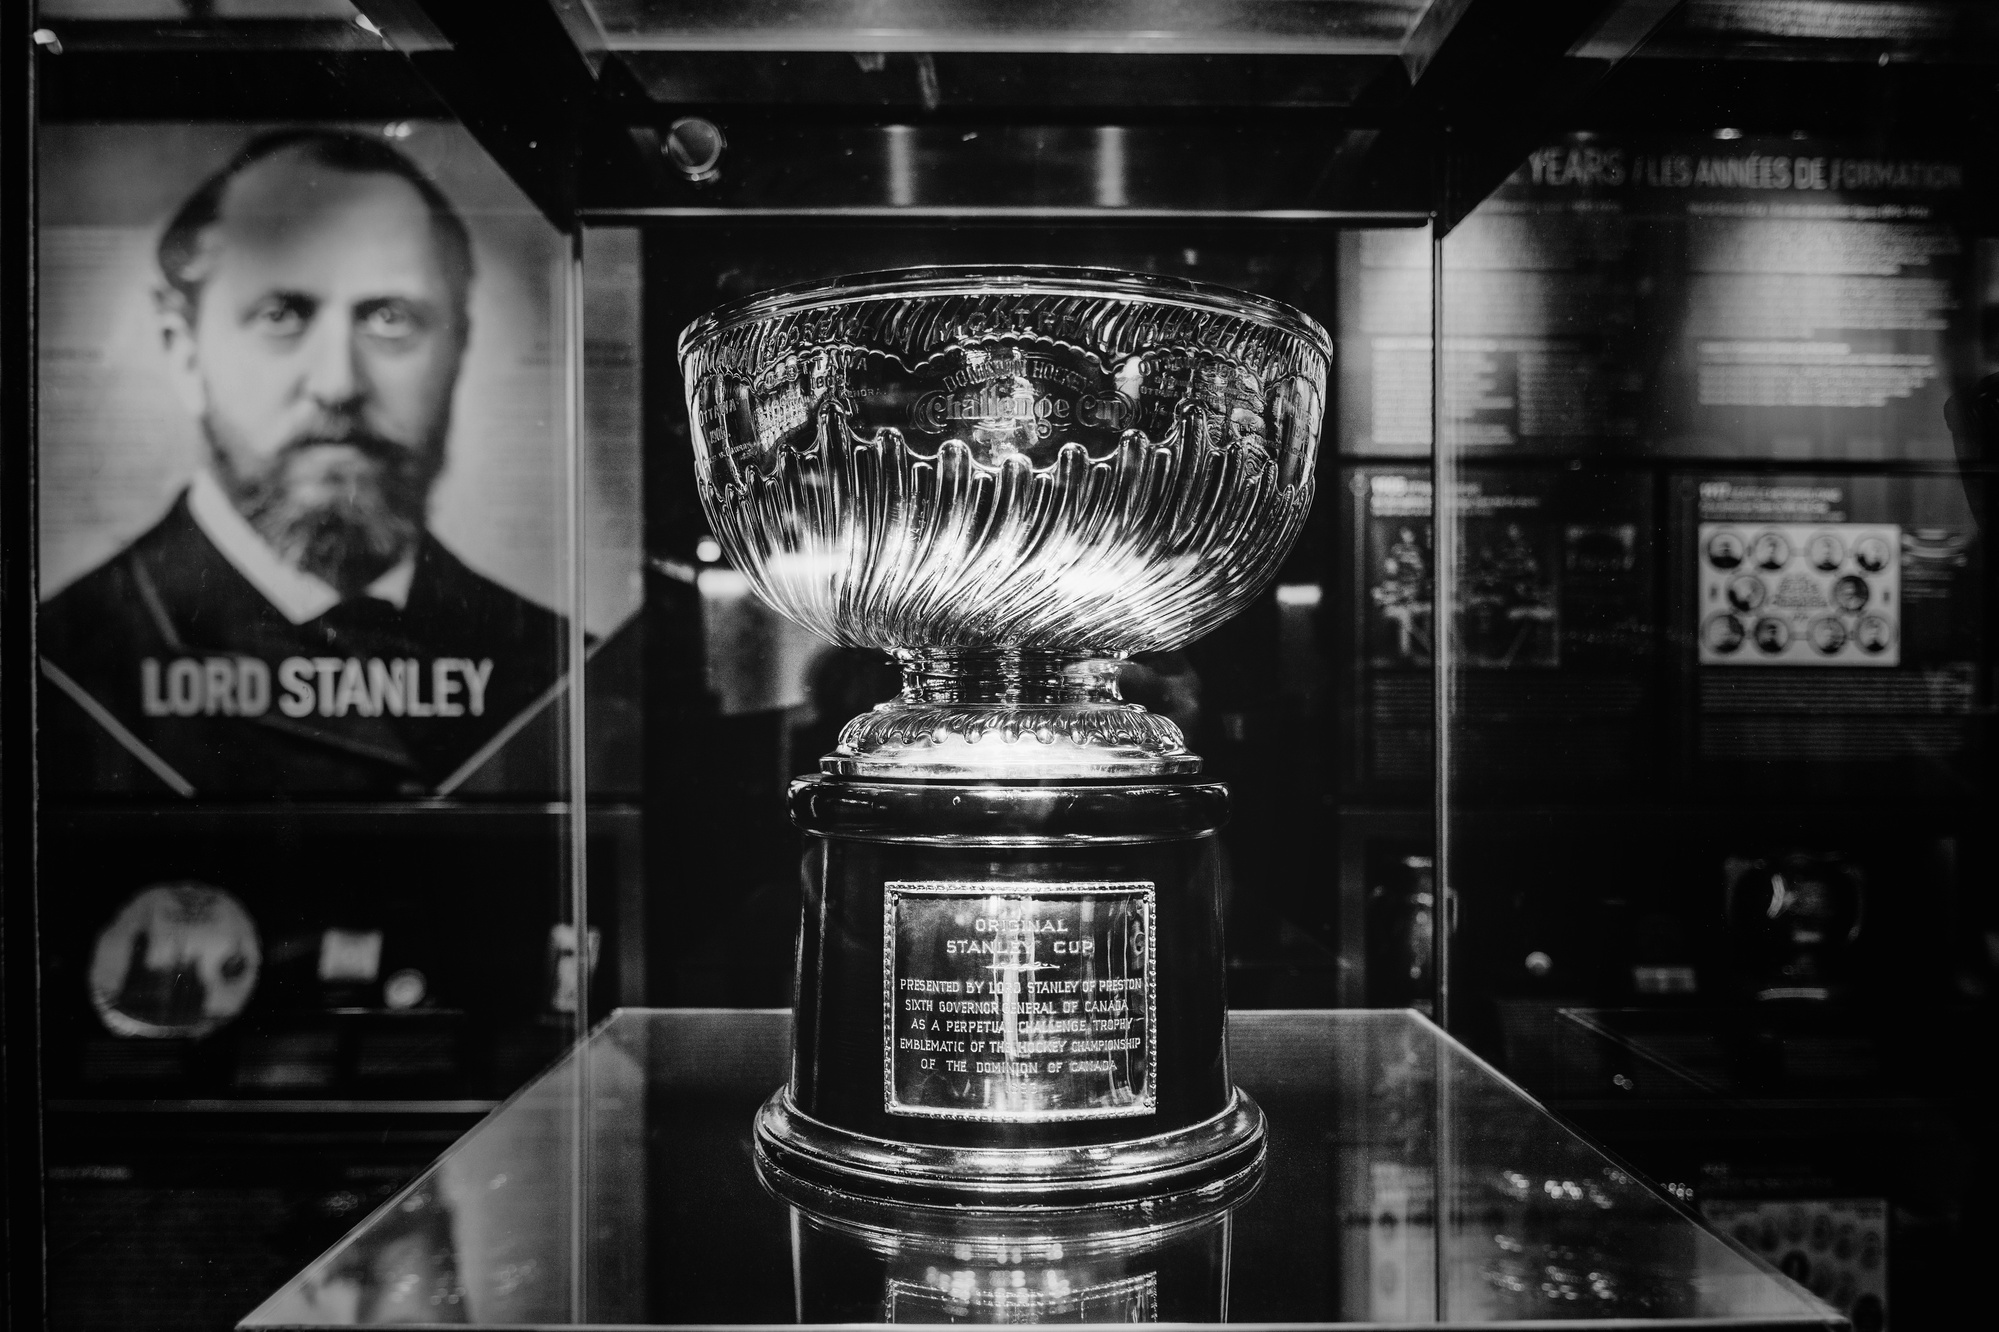 The Stanley Cup in its permanent home at the Hockey Hall of Fame in black & white by Frank Fenn